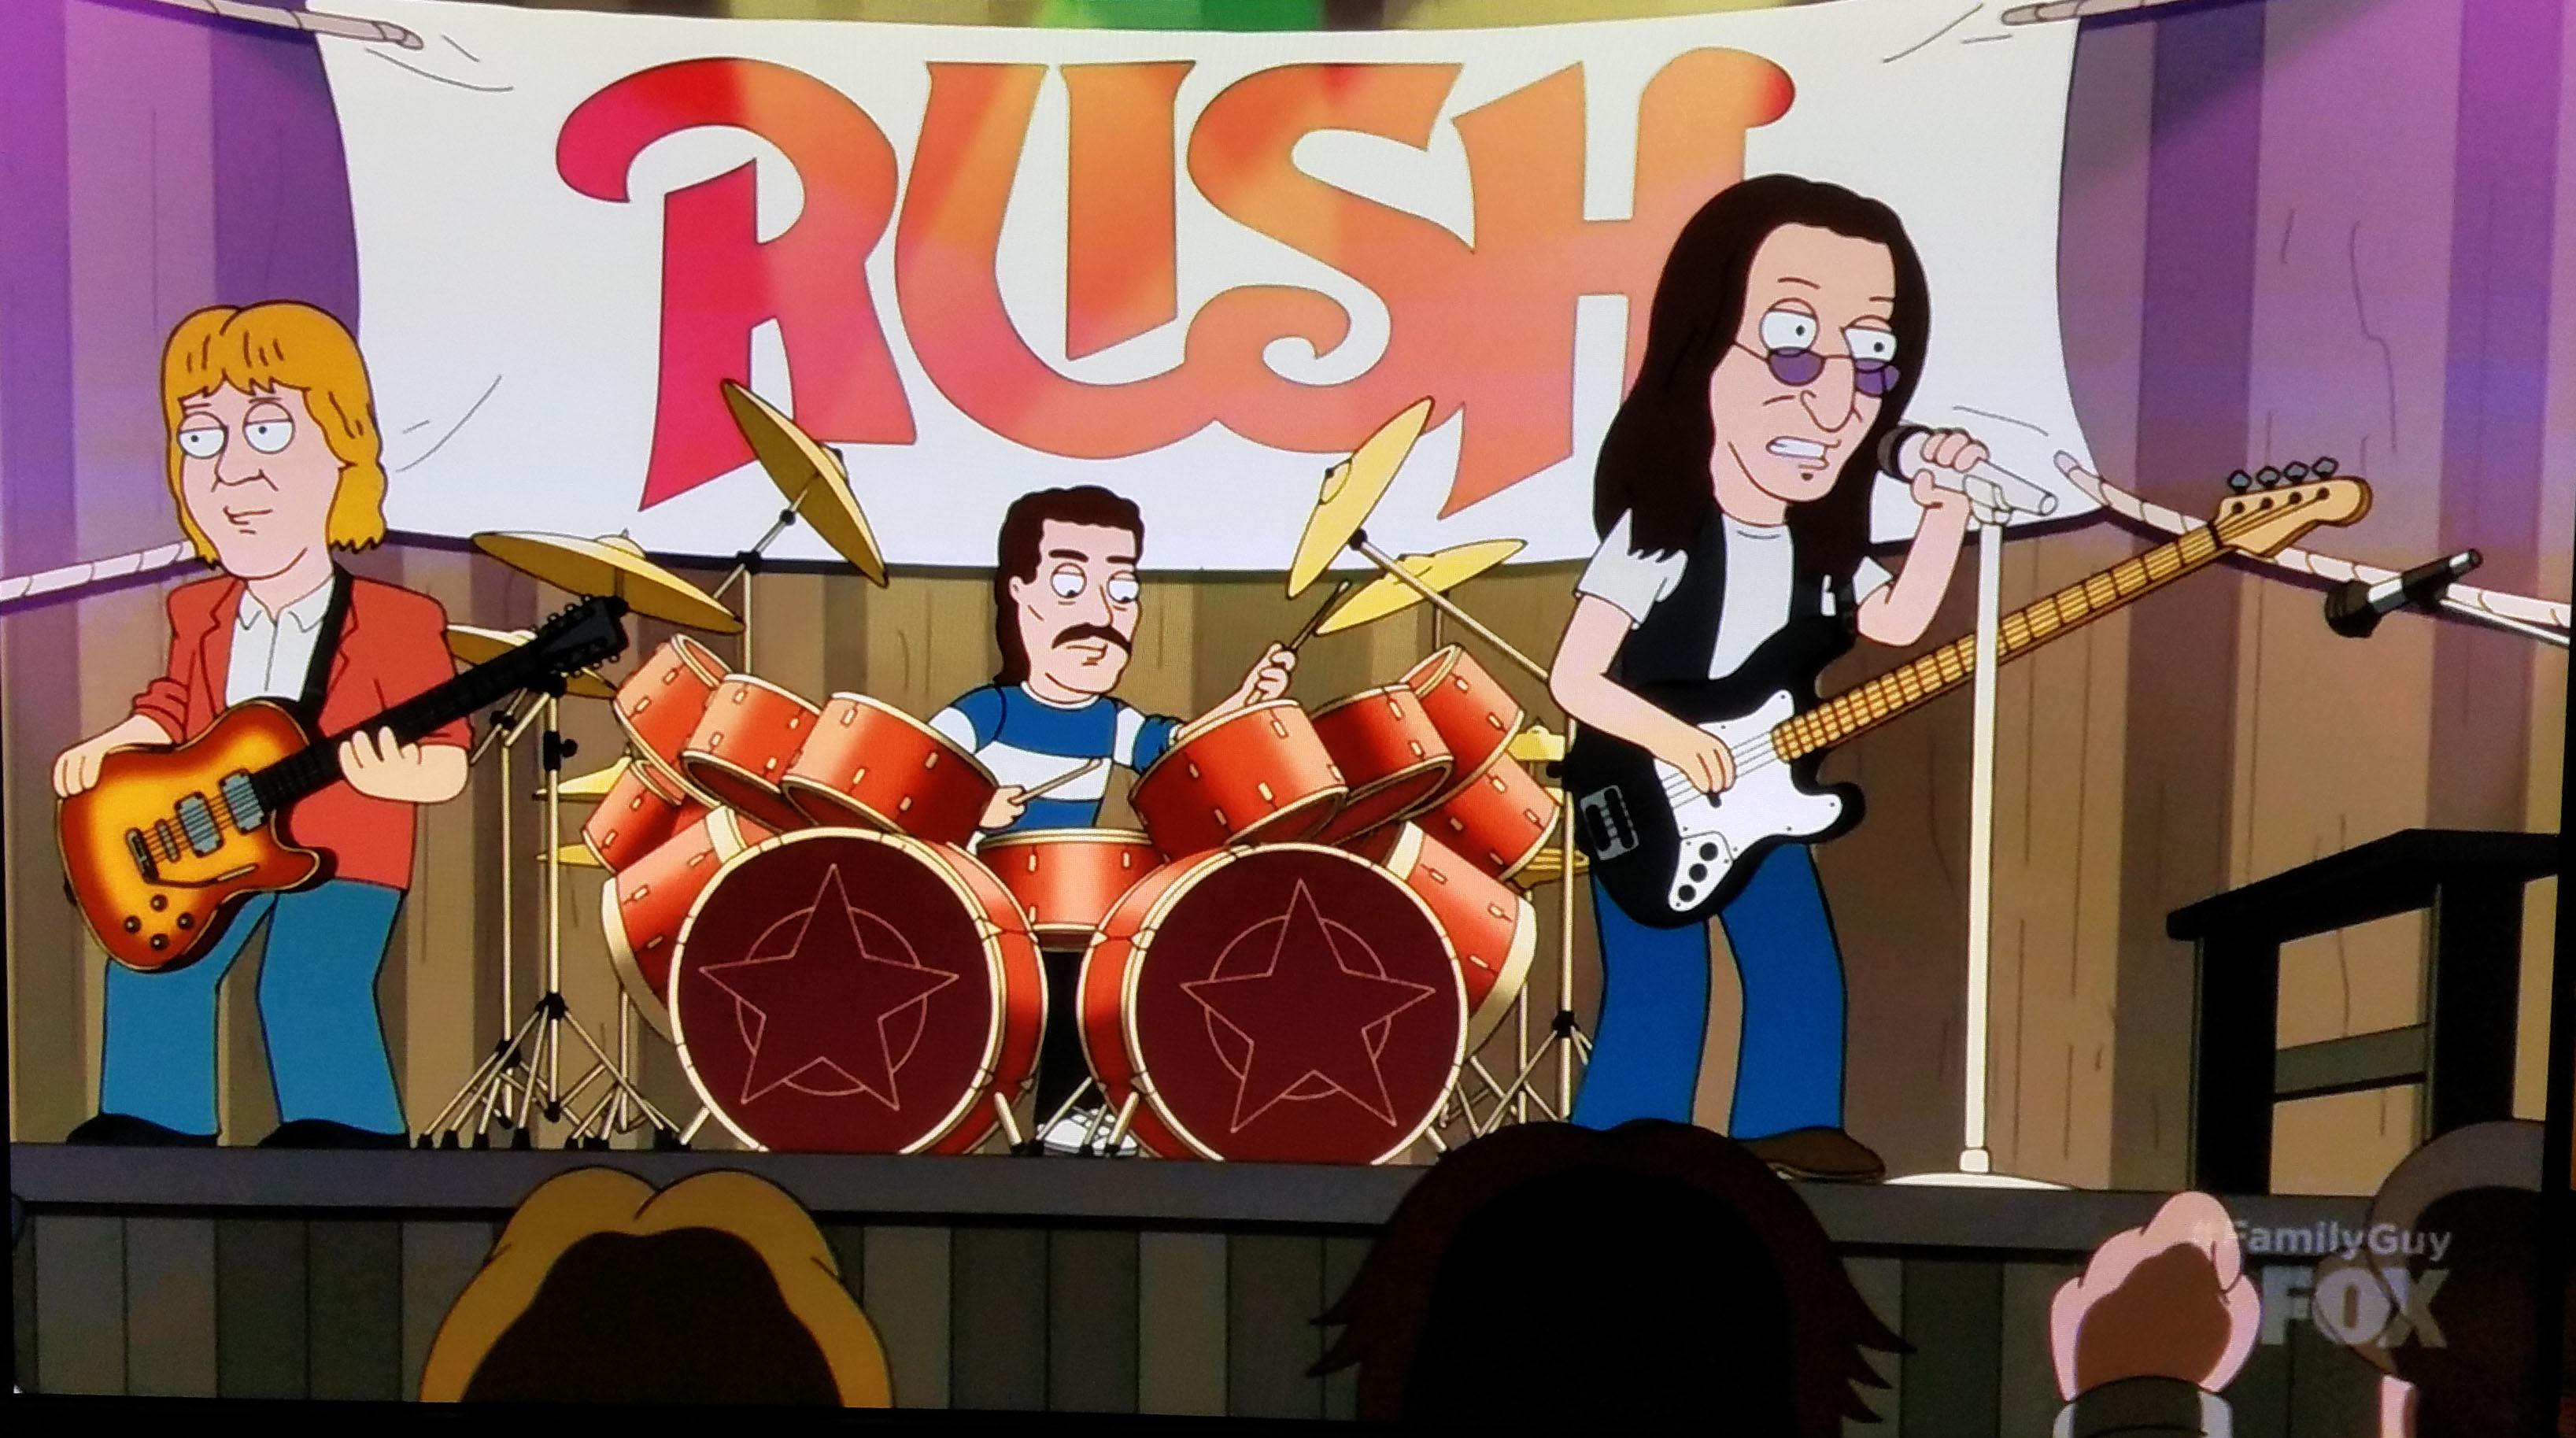 Rush Reference on Family Guy - Video and Screen Caps Now Online